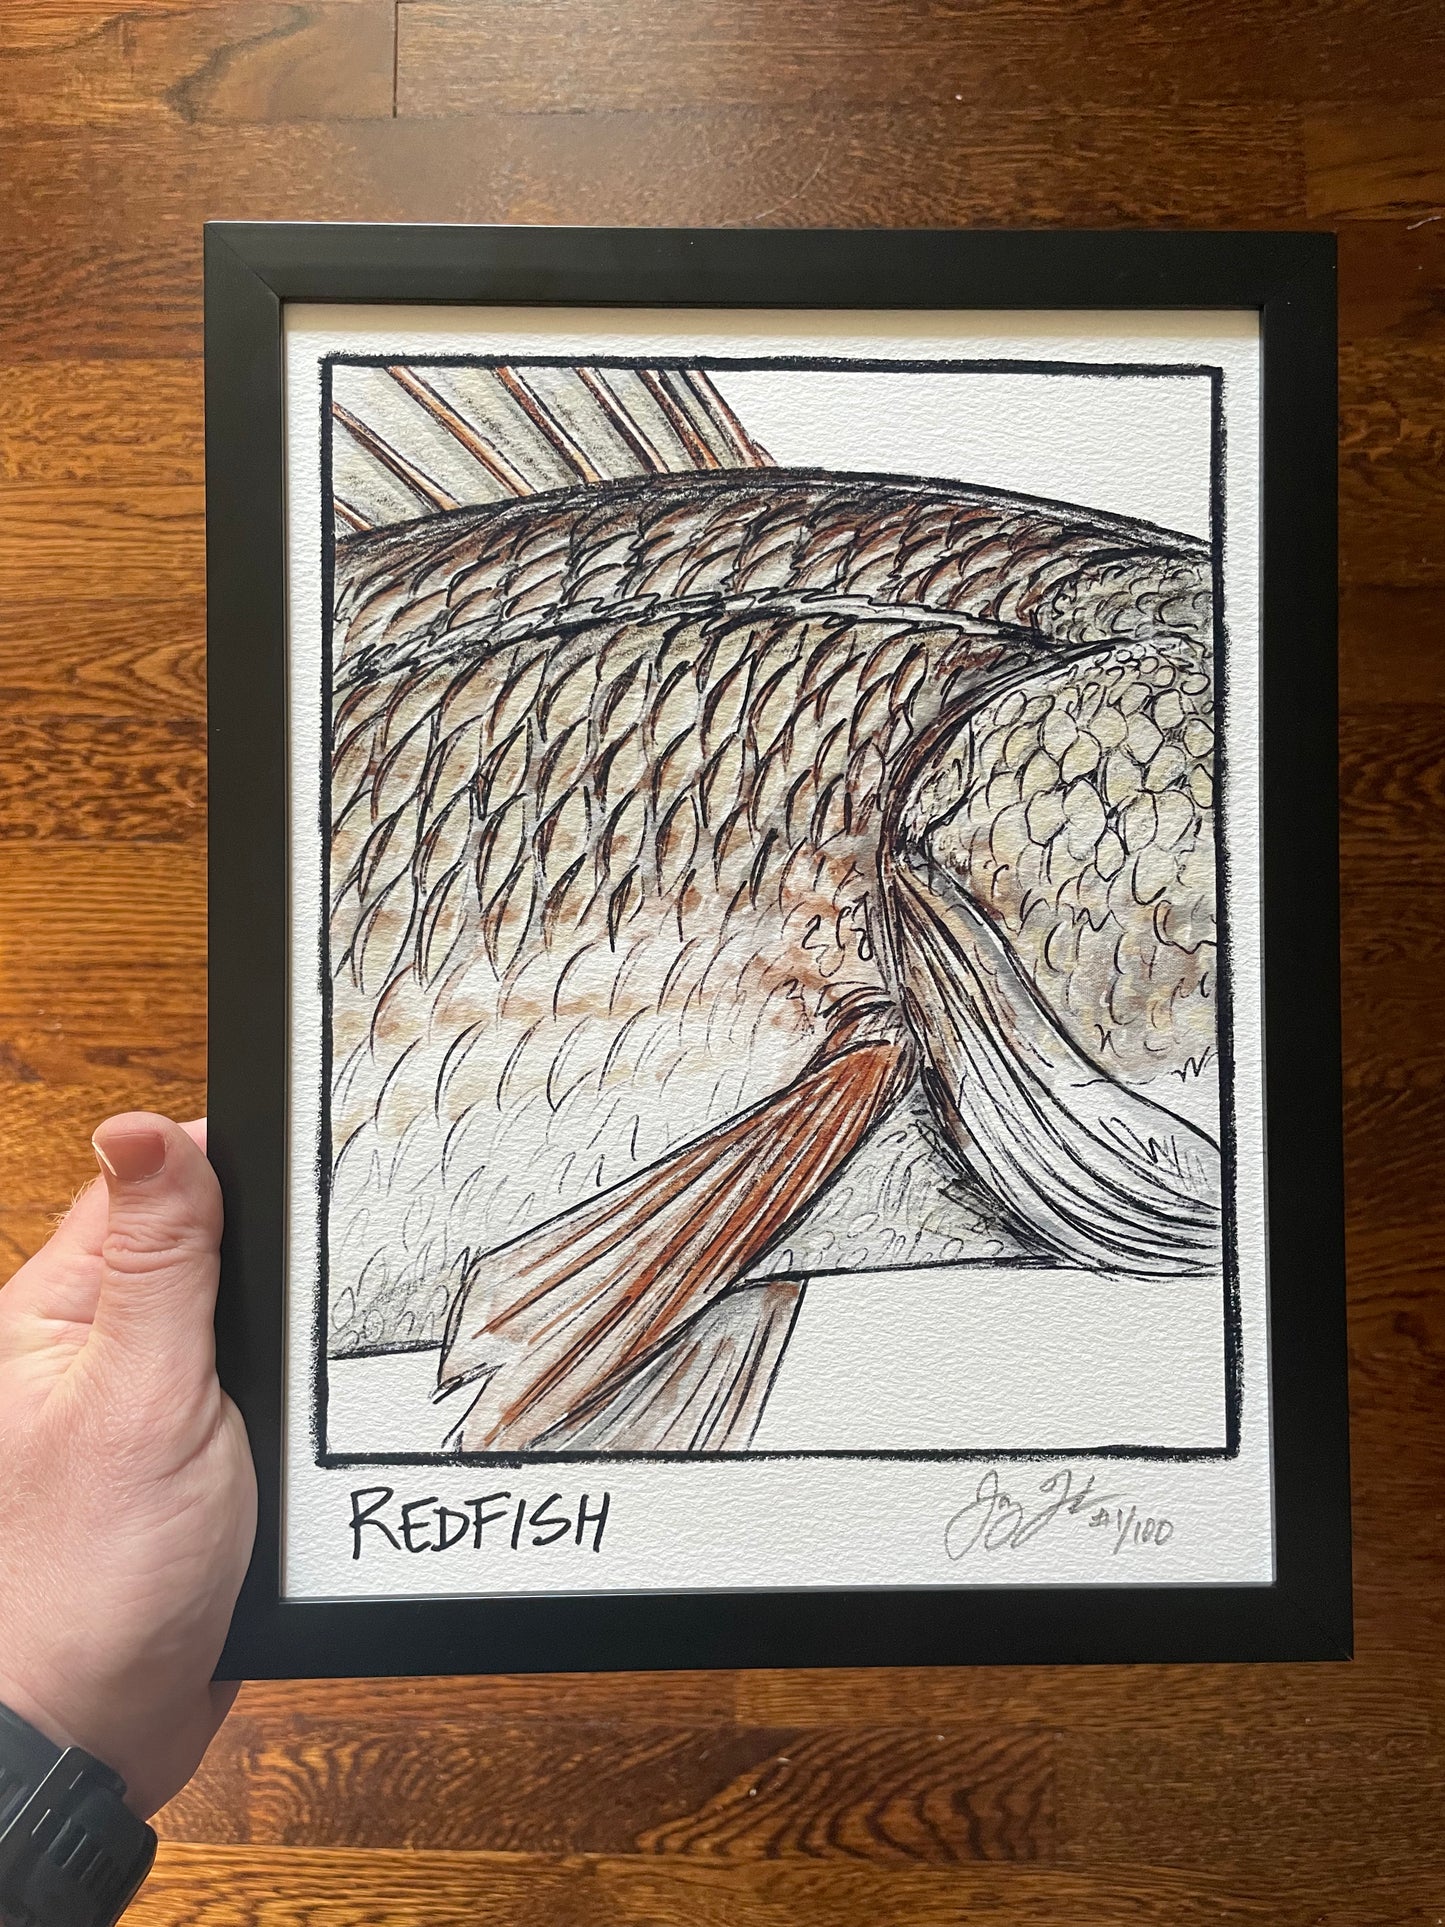 Redfish Closeup Print Ed. of 100 (Frame not included)